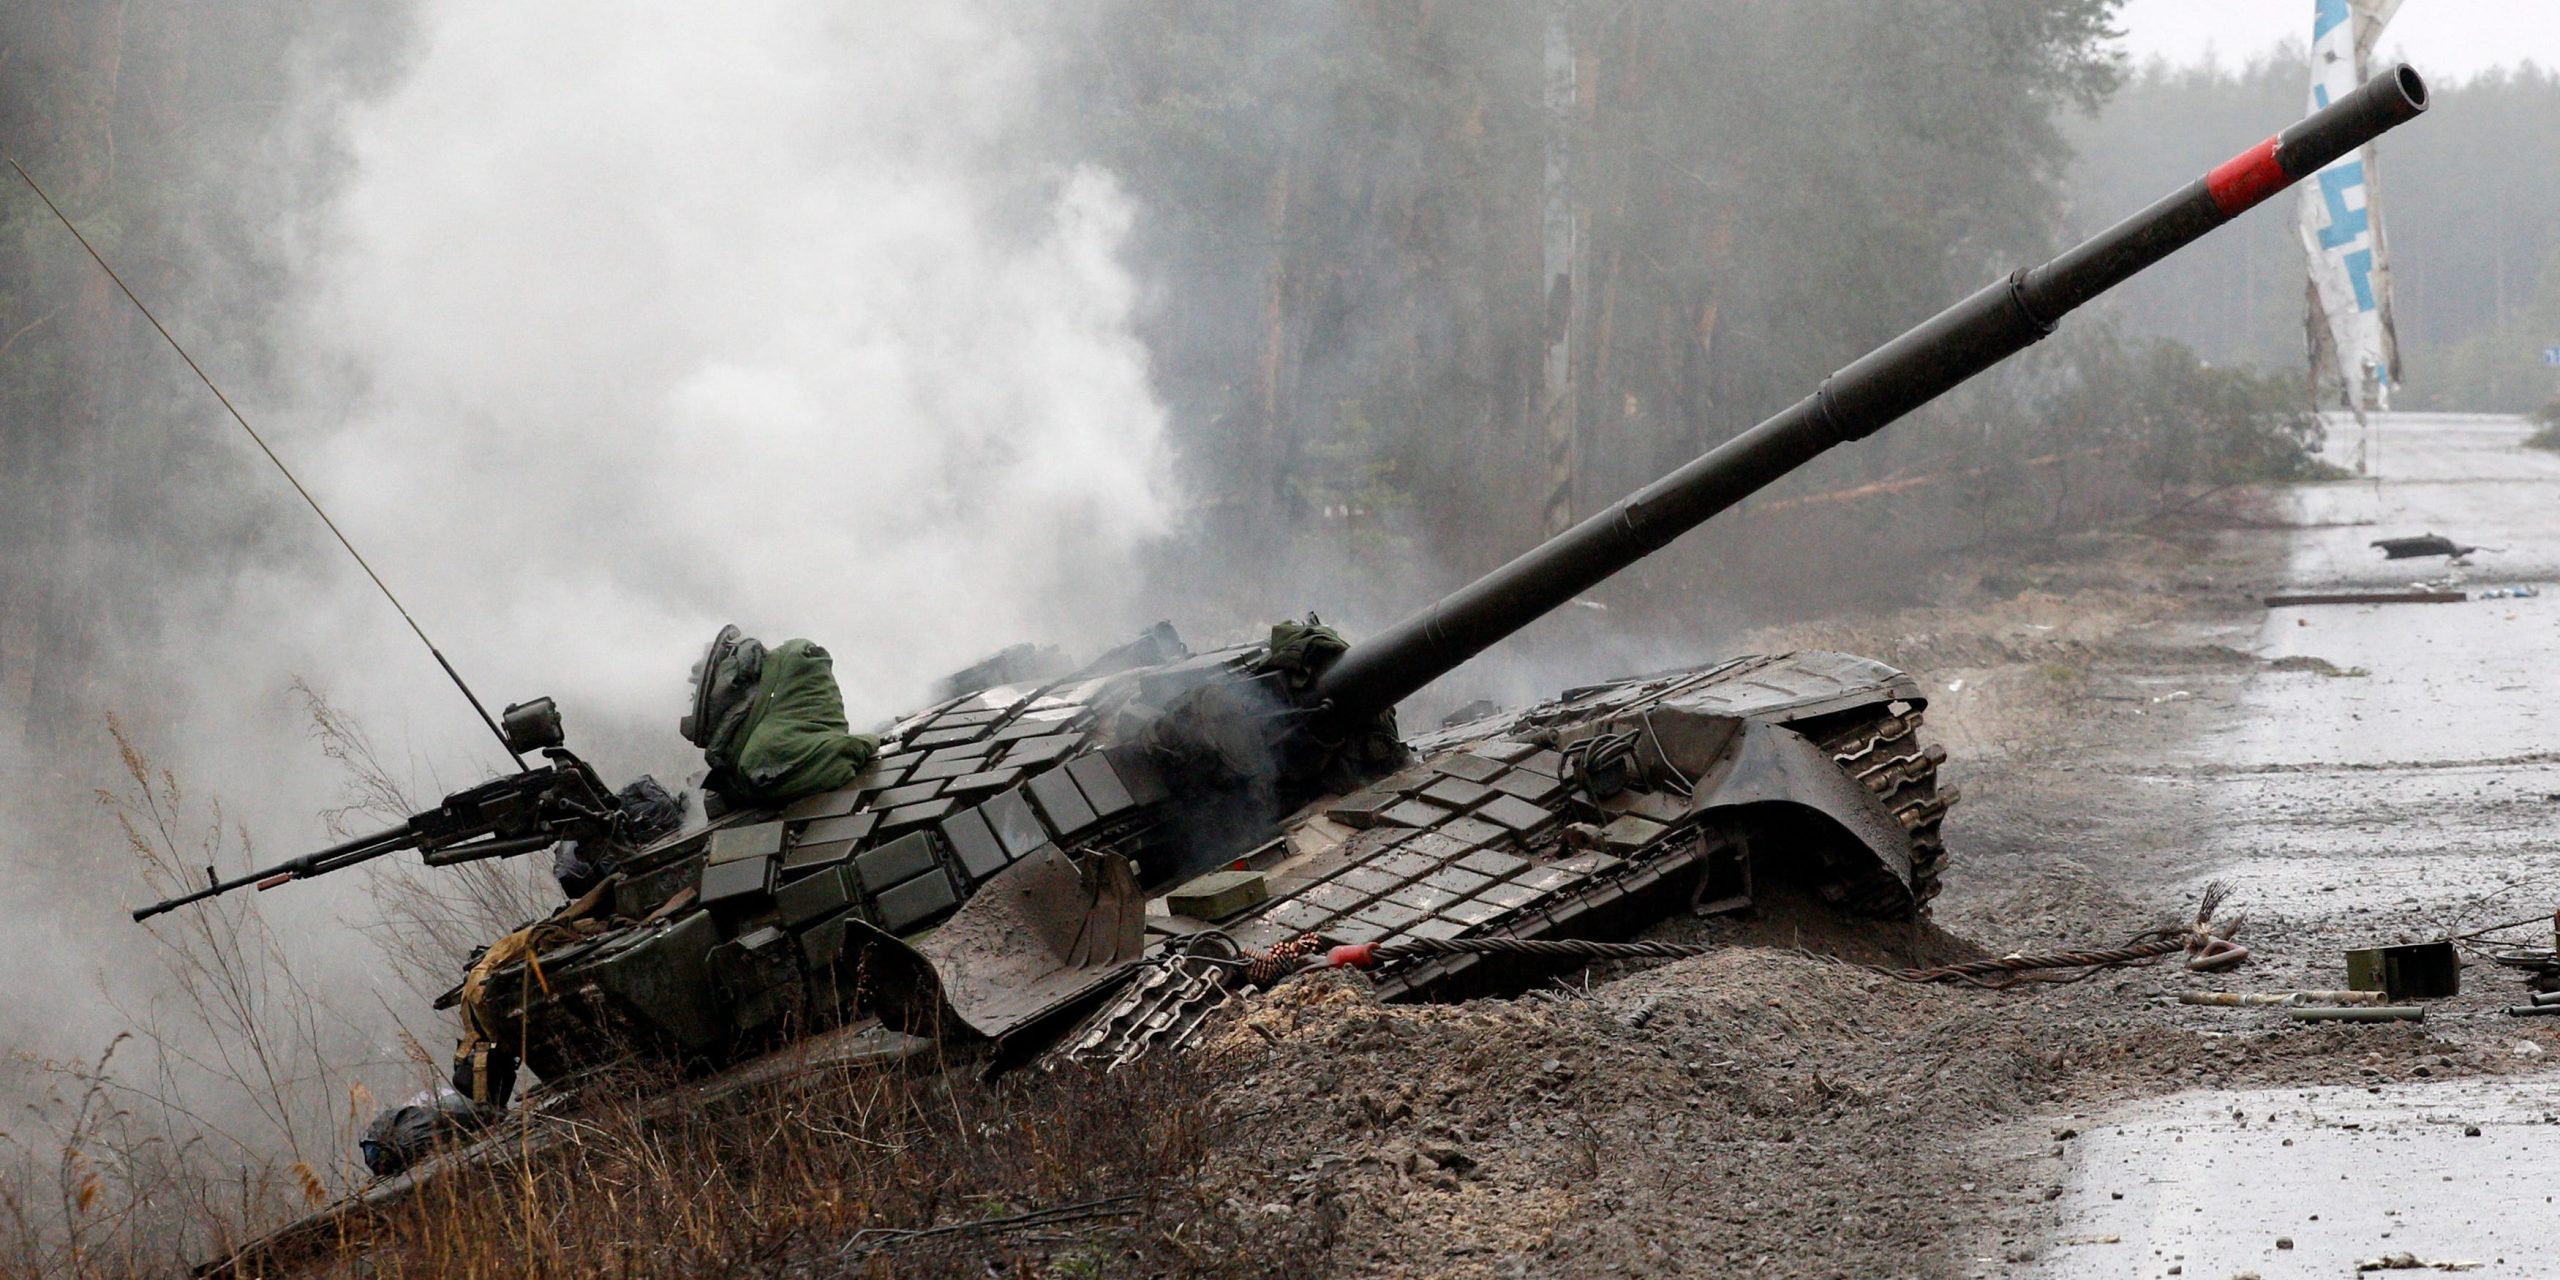 Smoke rises from a Russian tank destroyed by the Ukrainian forces on the side of a road in Lugansk region.